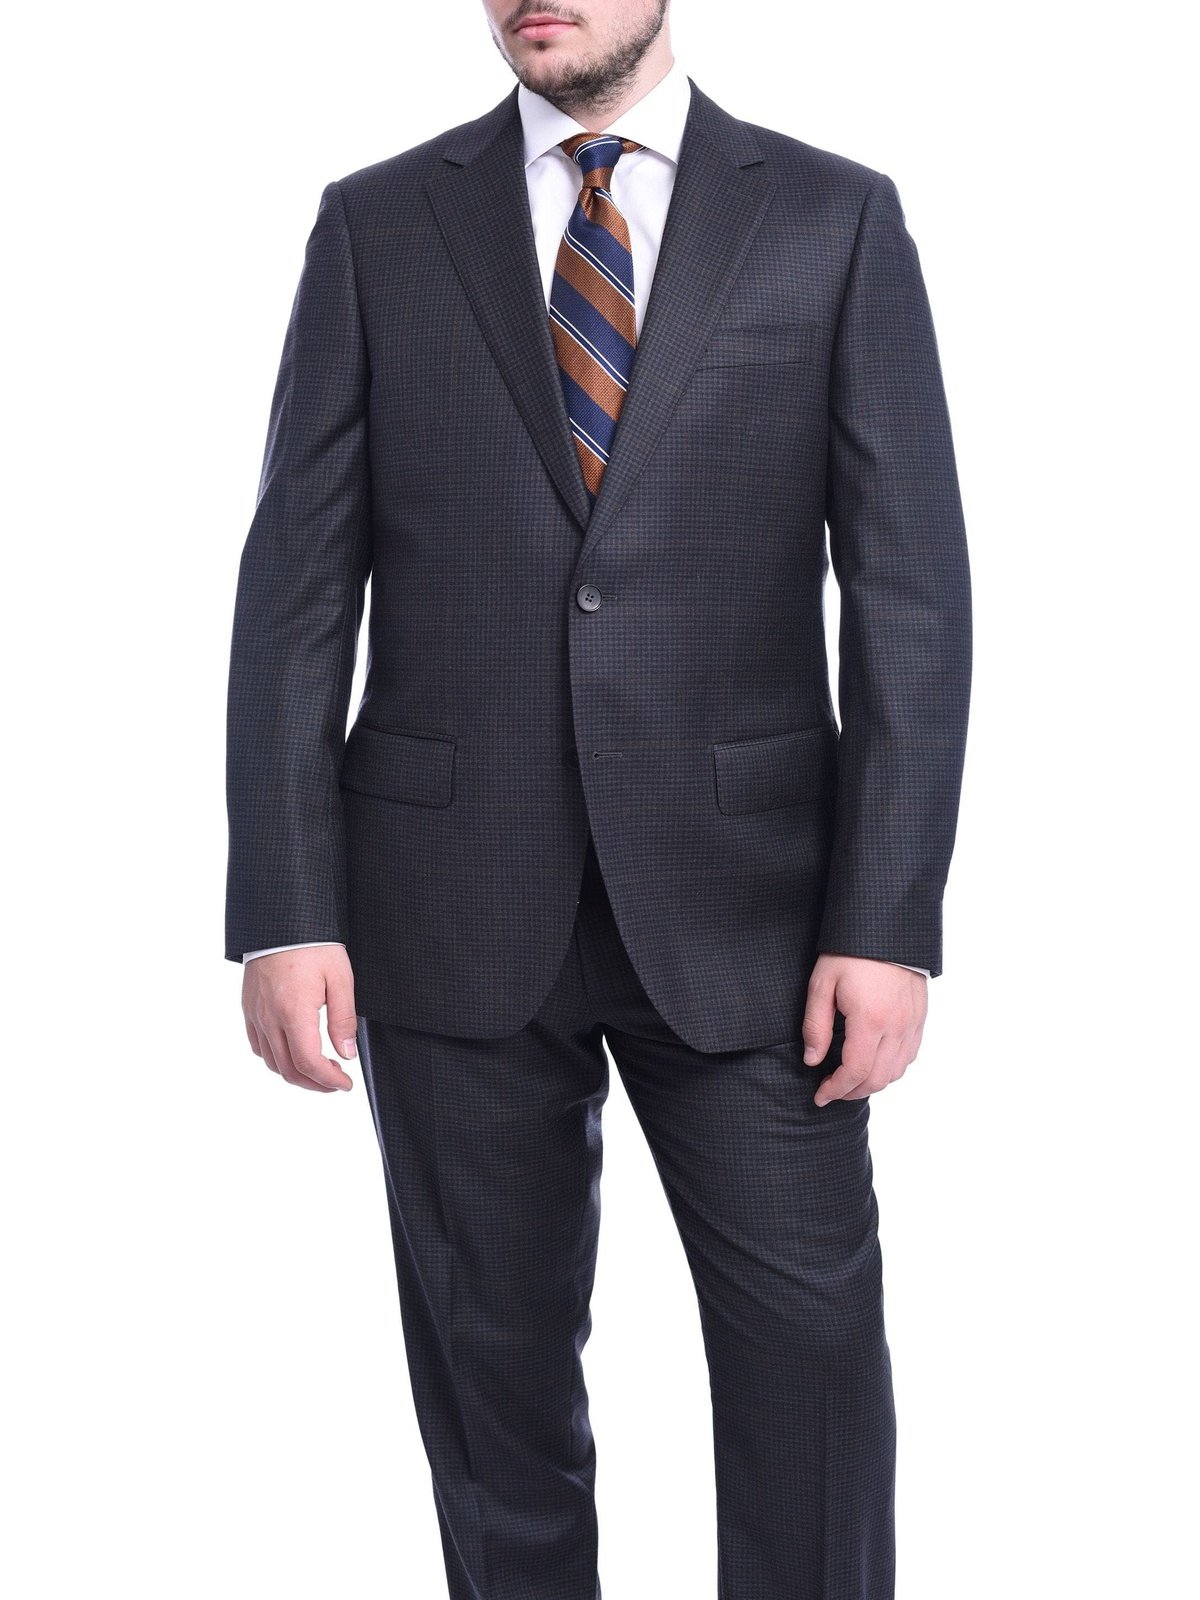 Napoli TWO PIECE SUITS Napoli Classic Fit Charcoal Gray Check Half Canvassed Super 150s Wool Suit